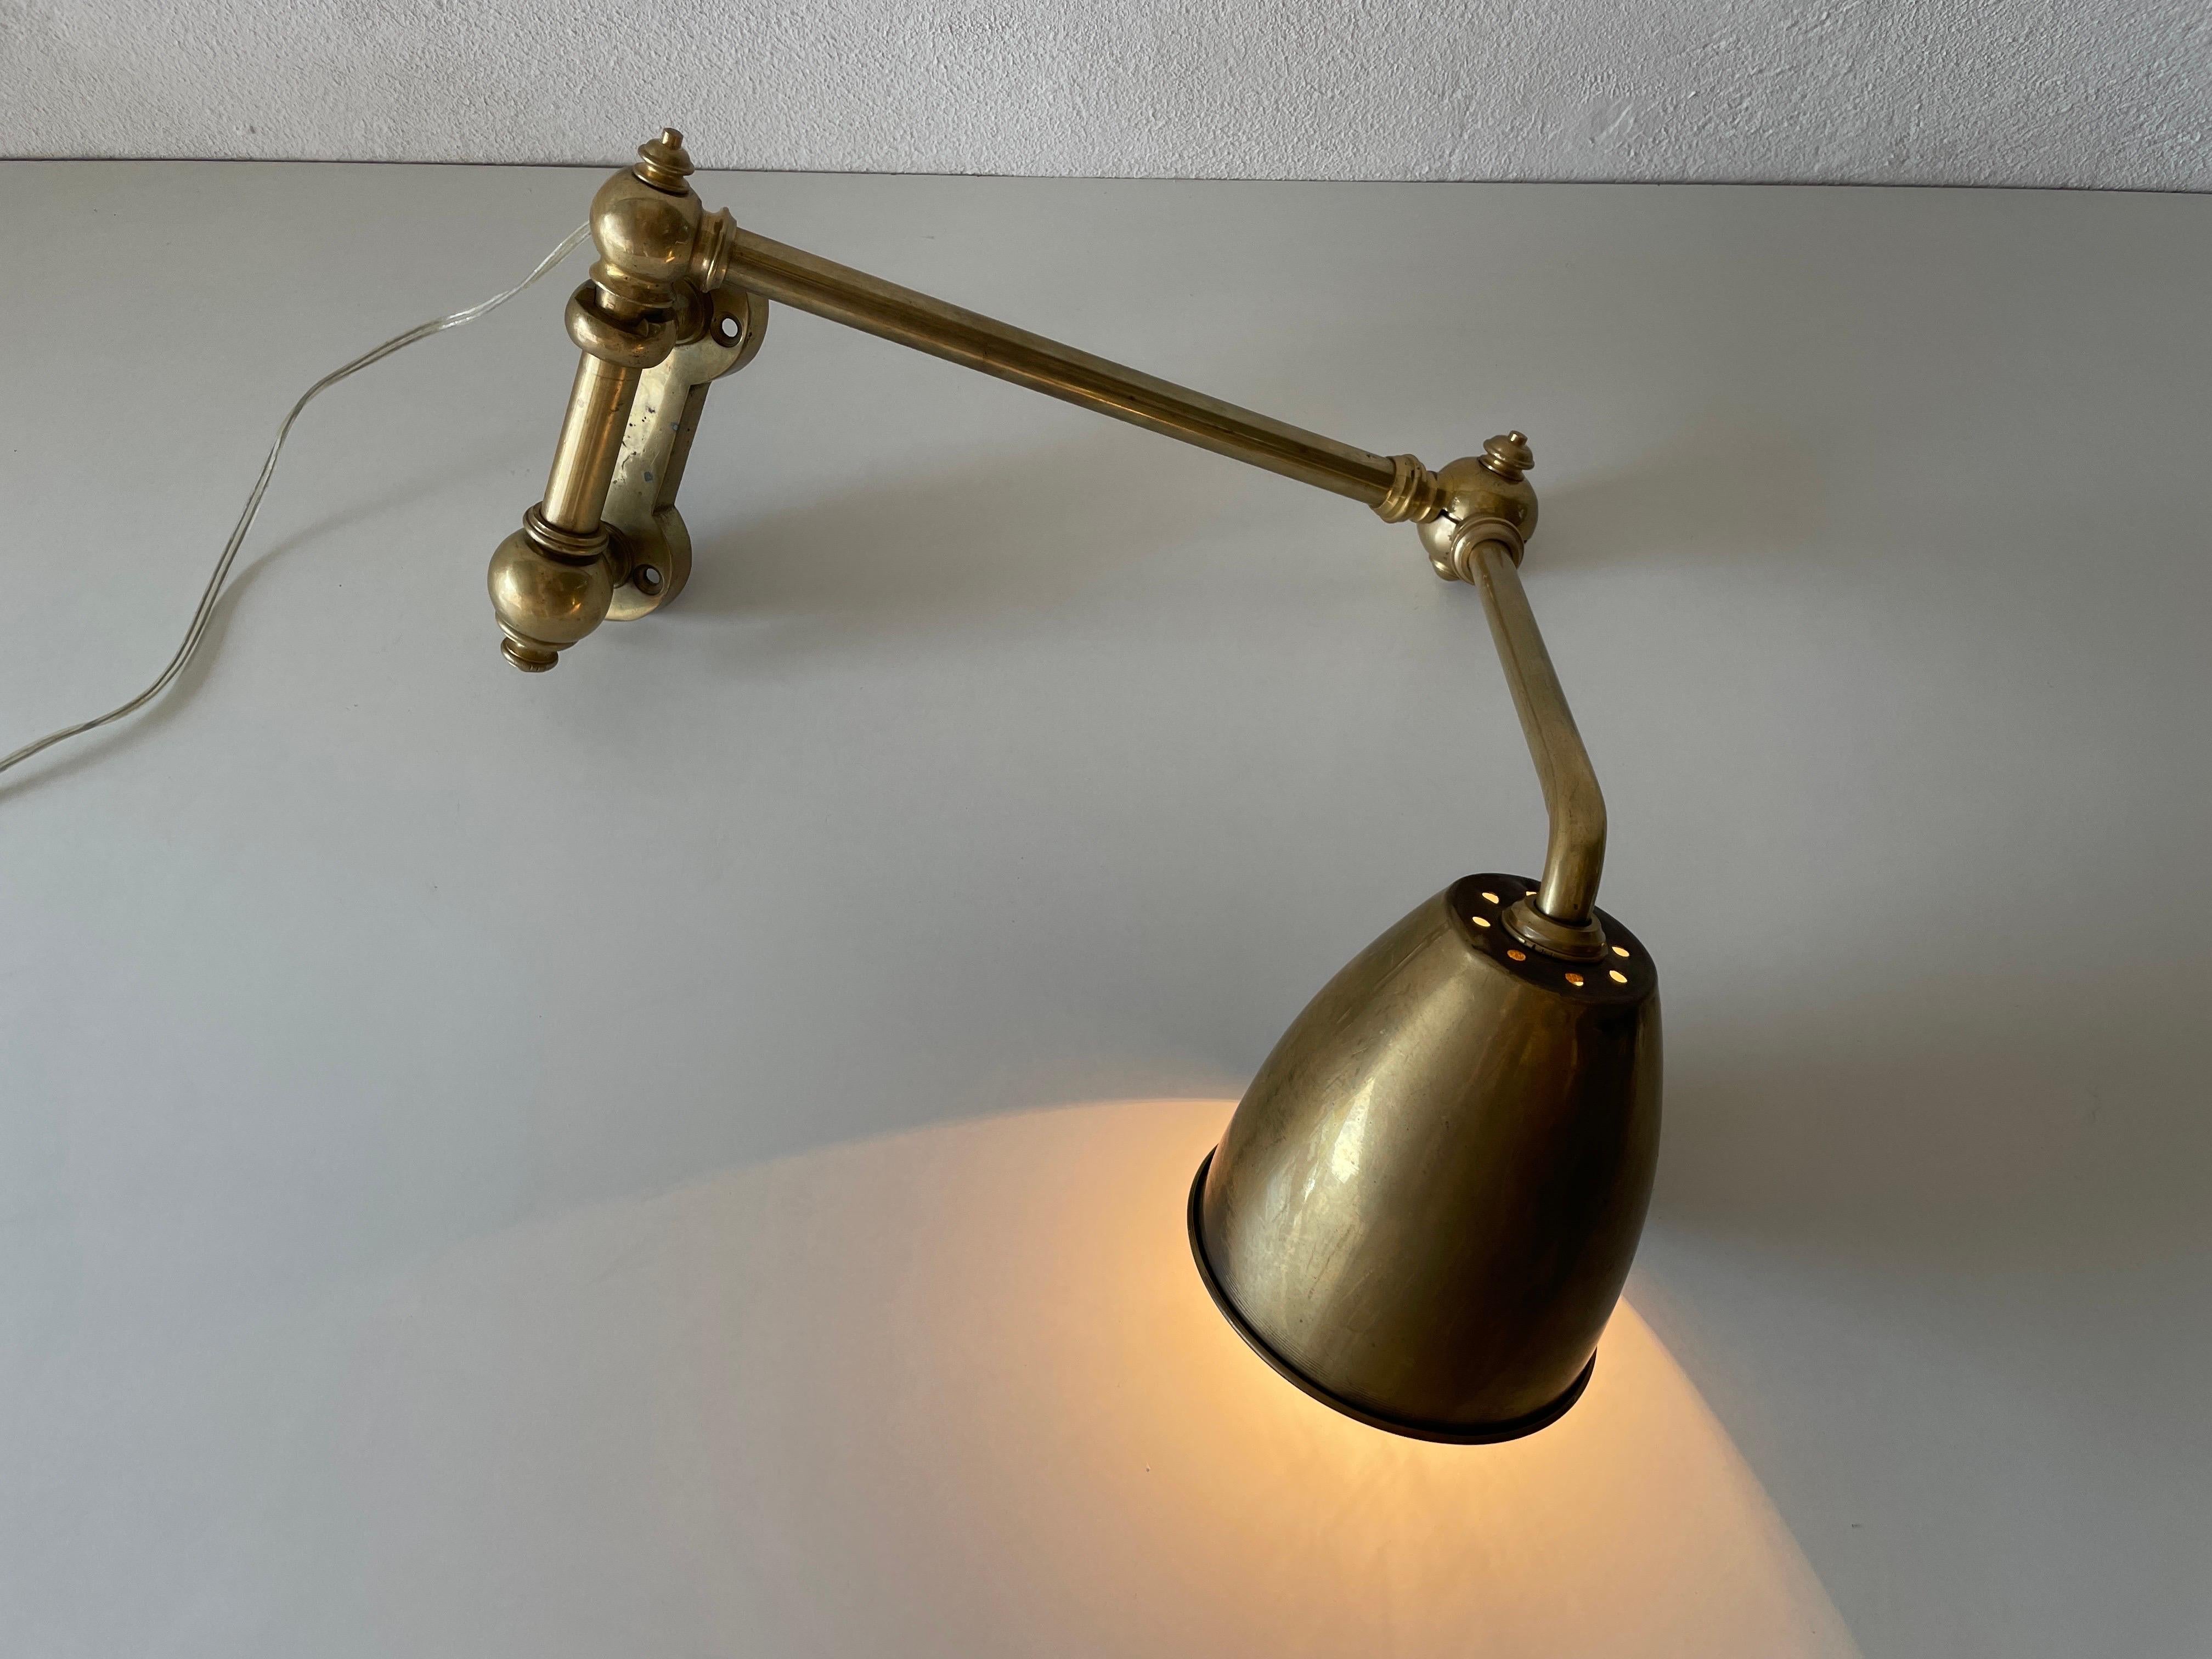 Full Brass Adjustable Head and Arm Industrial Task Wall Lamp, 1940s, Germany For Sale 6